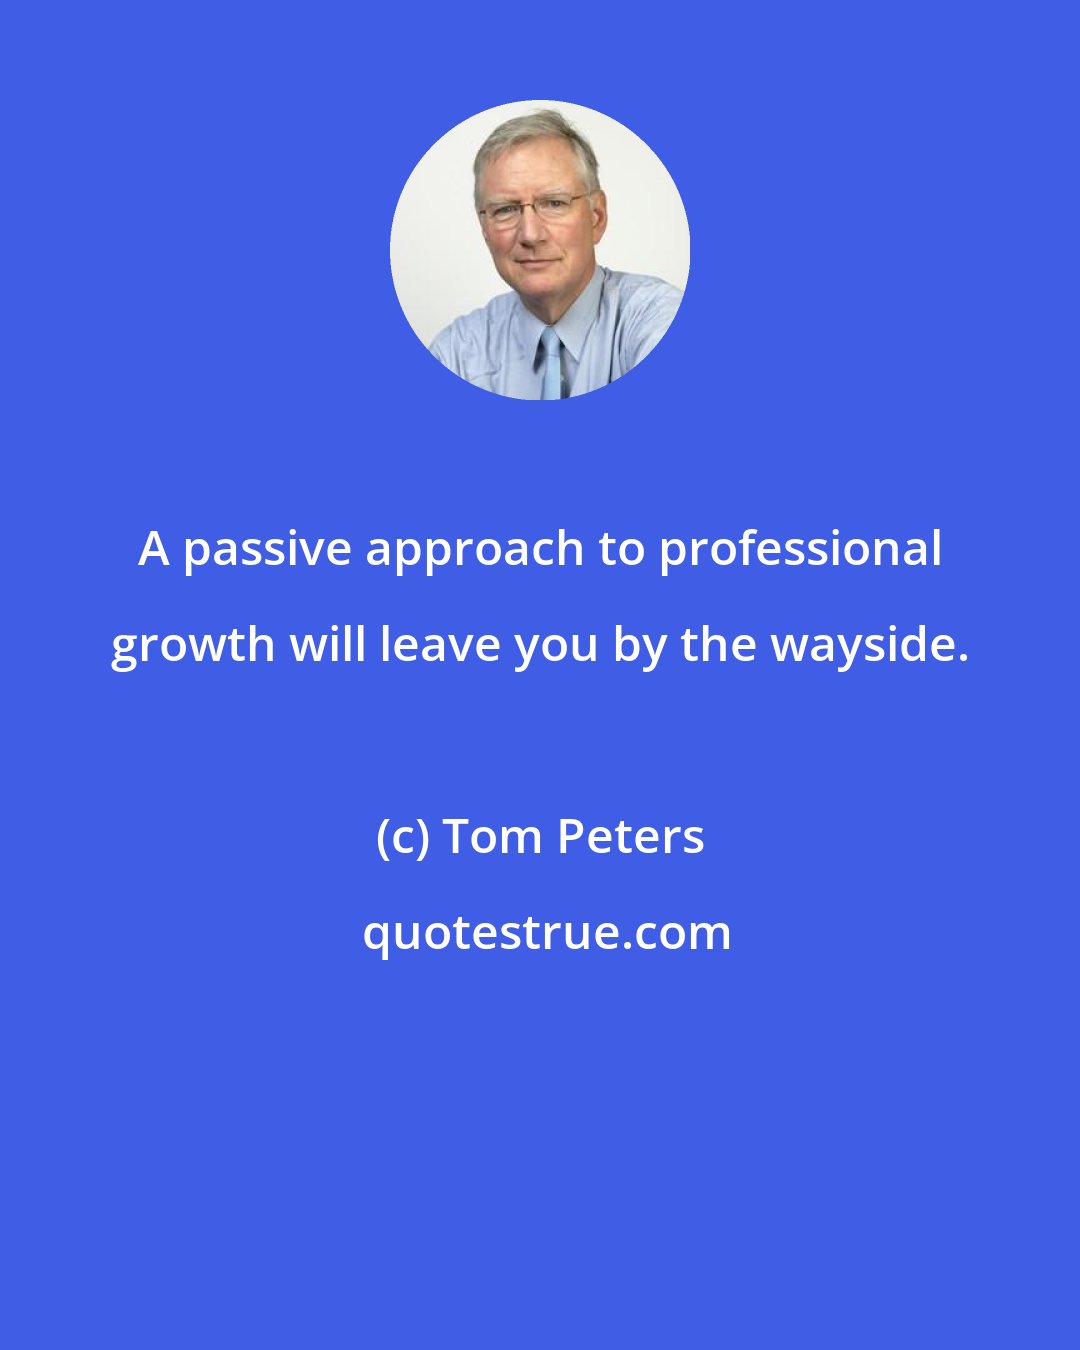 Tom Peters: A passive approach to professional growth will leave you by the wayside.